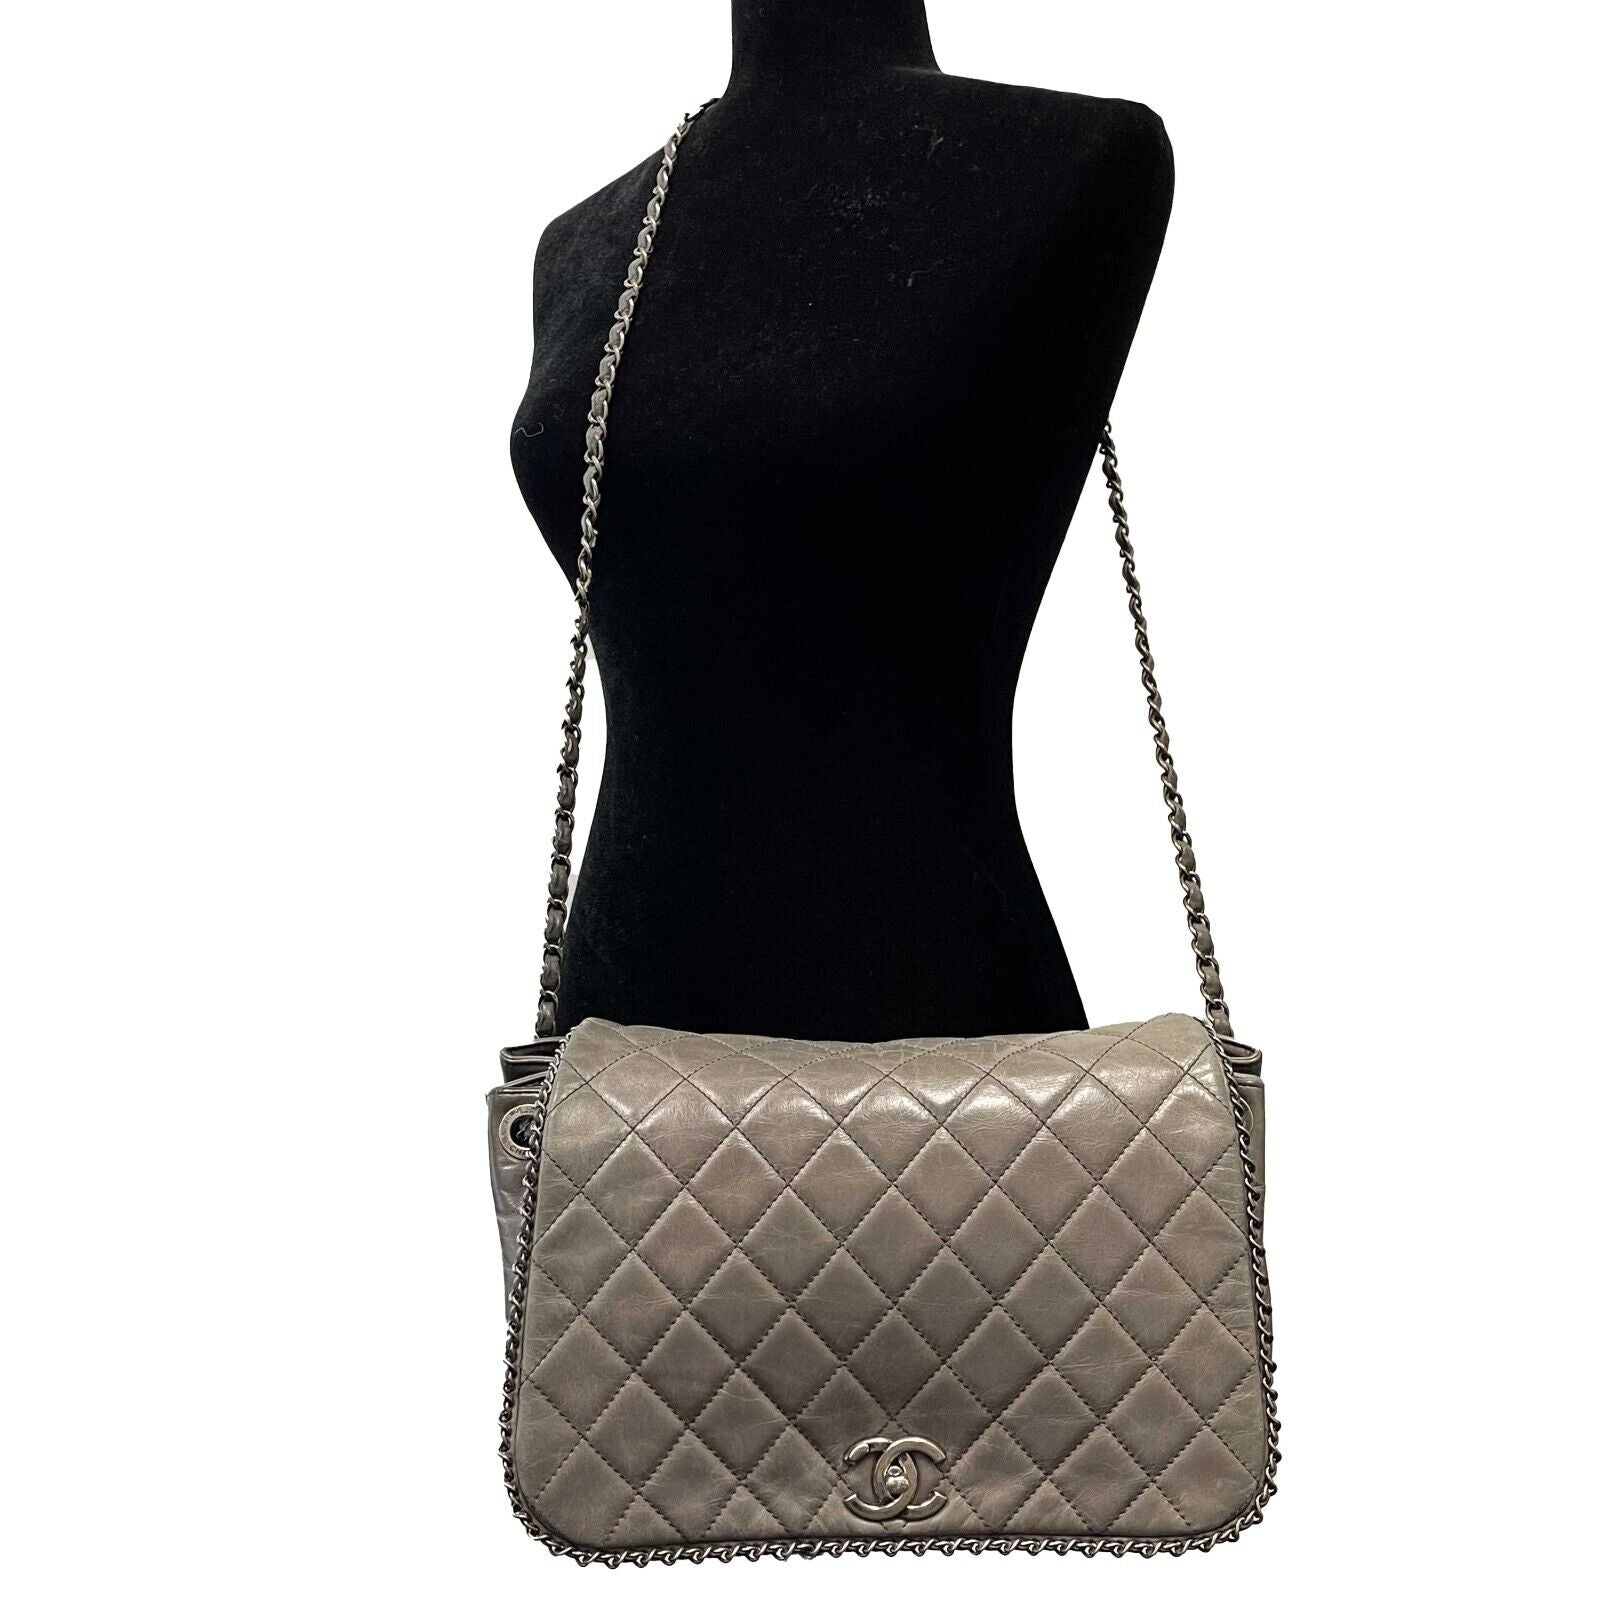 Chanel - Calfskin Quilted Large CC Enchained Accordion - Gray Shoulder Bag